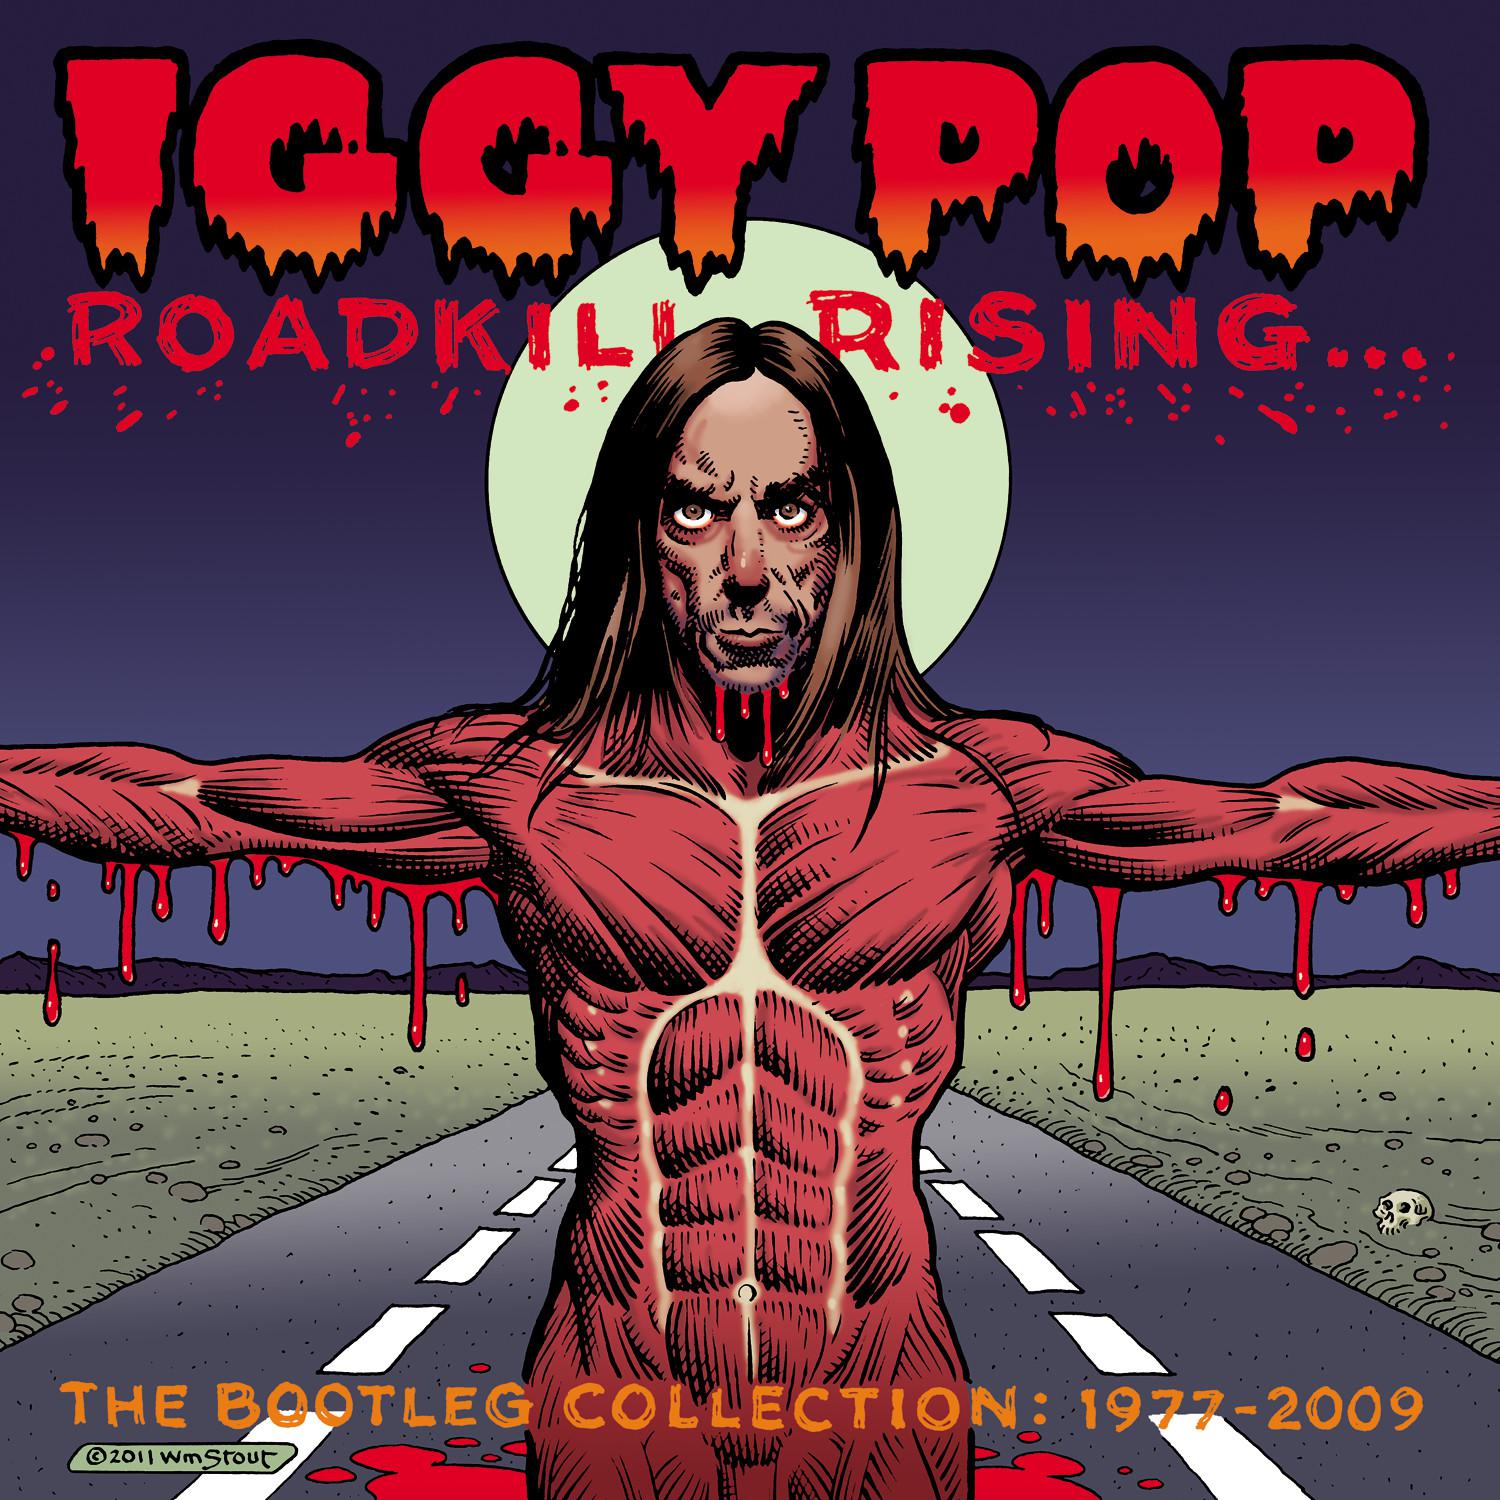 Roadkill Rising: The Bootleg Collection 1977-2009专辑